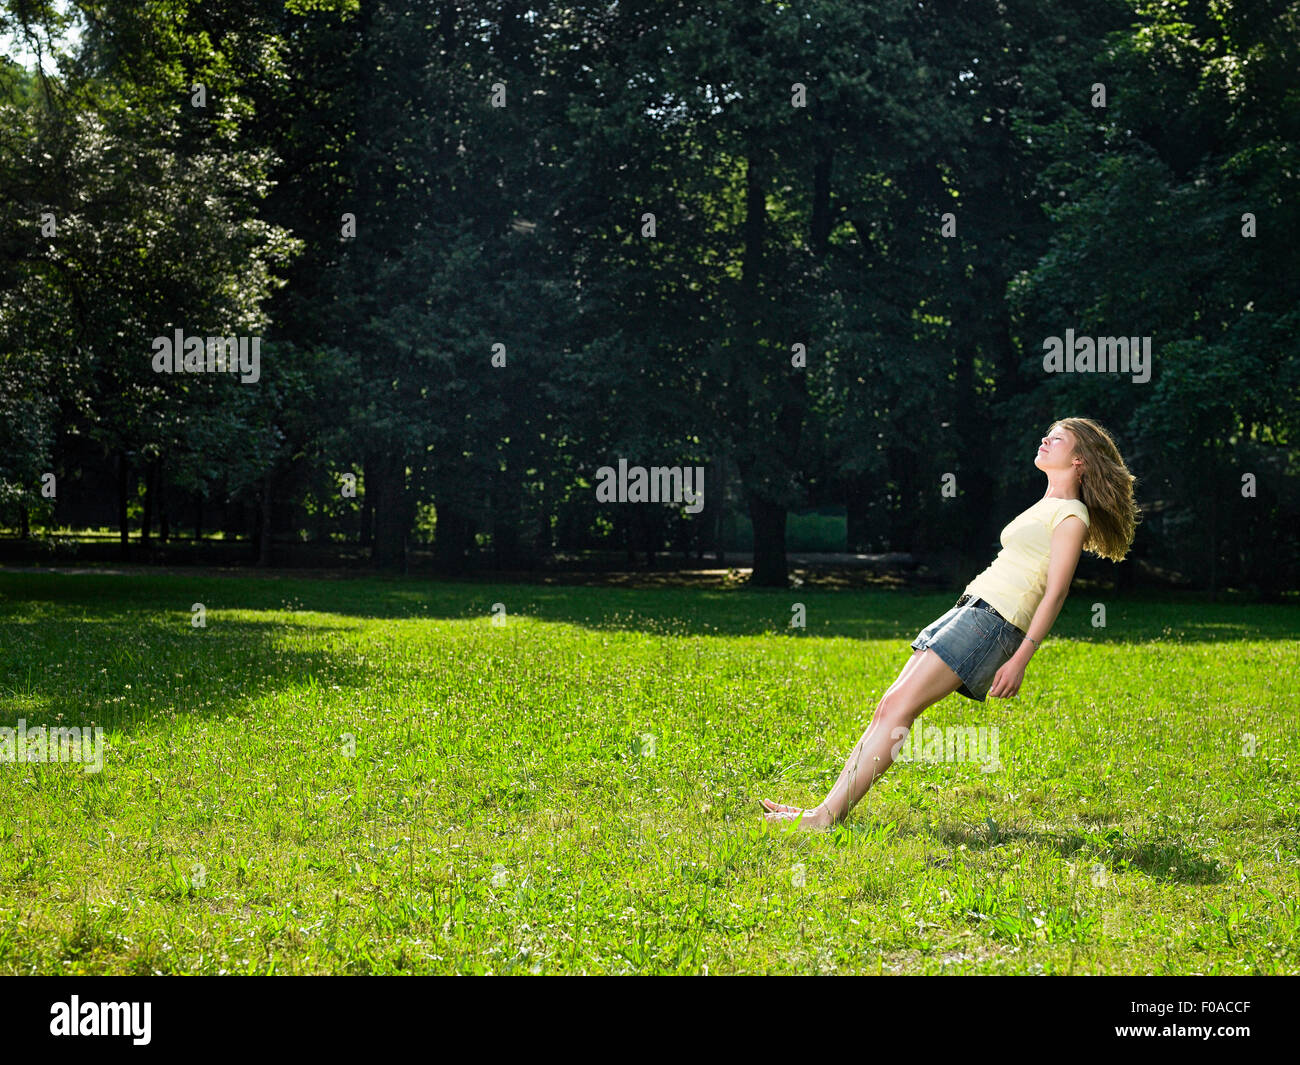 Young woman in park free falling backwards with eyes closed Stock Photo